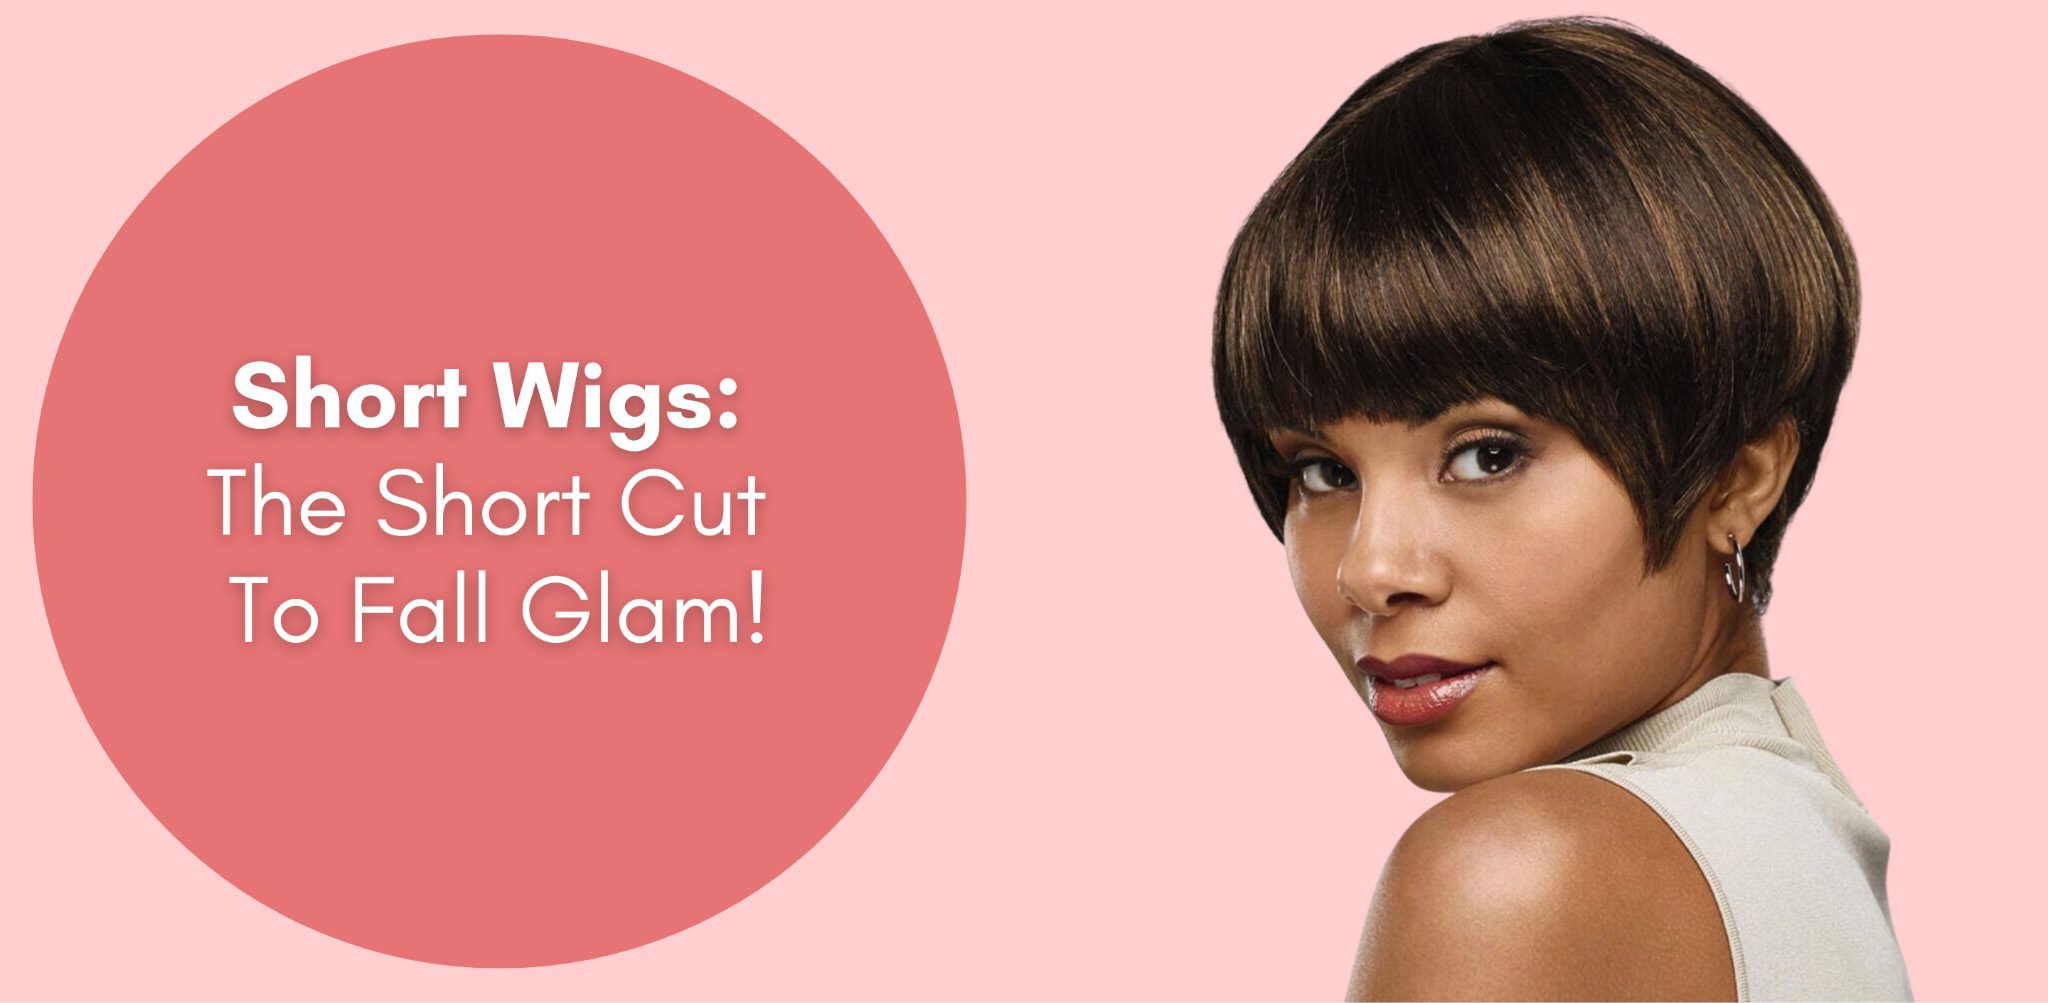 Short Wigs: The Short Cut To Fall Glam!